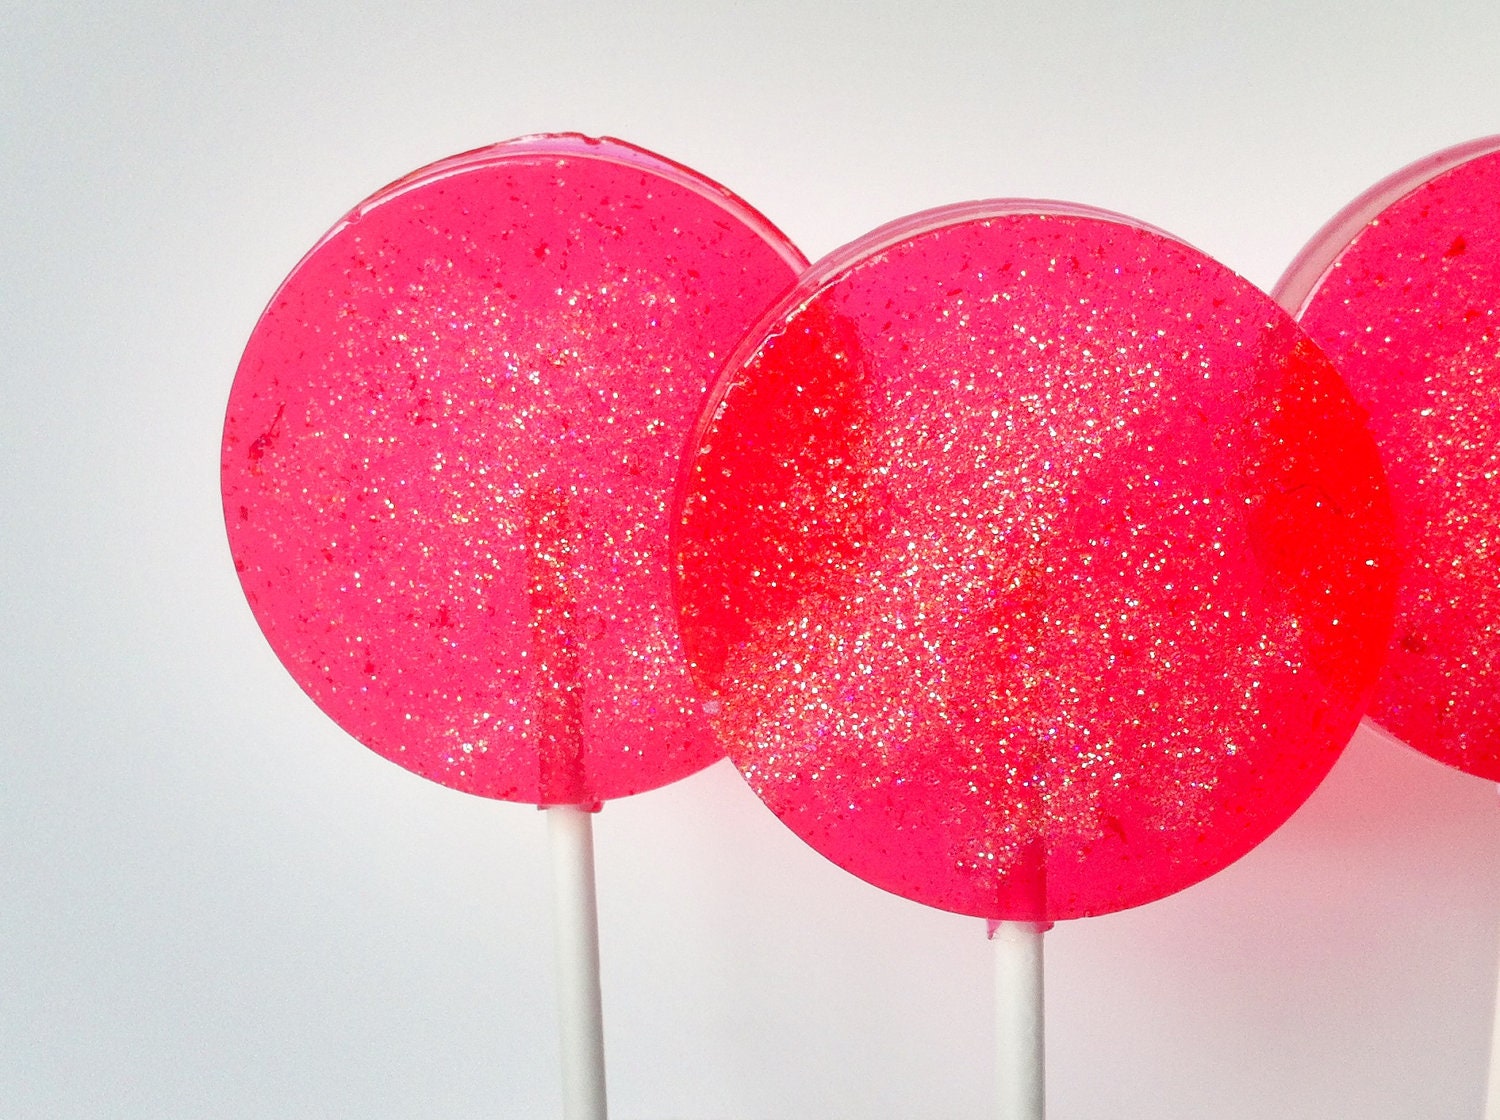 Guava Hard Candy Lollipops-Party Favors, Delicious Hard Candy Suckers, Candy, Fruity Candy, Baby Shower gifts-SIX LOLLIPOPS